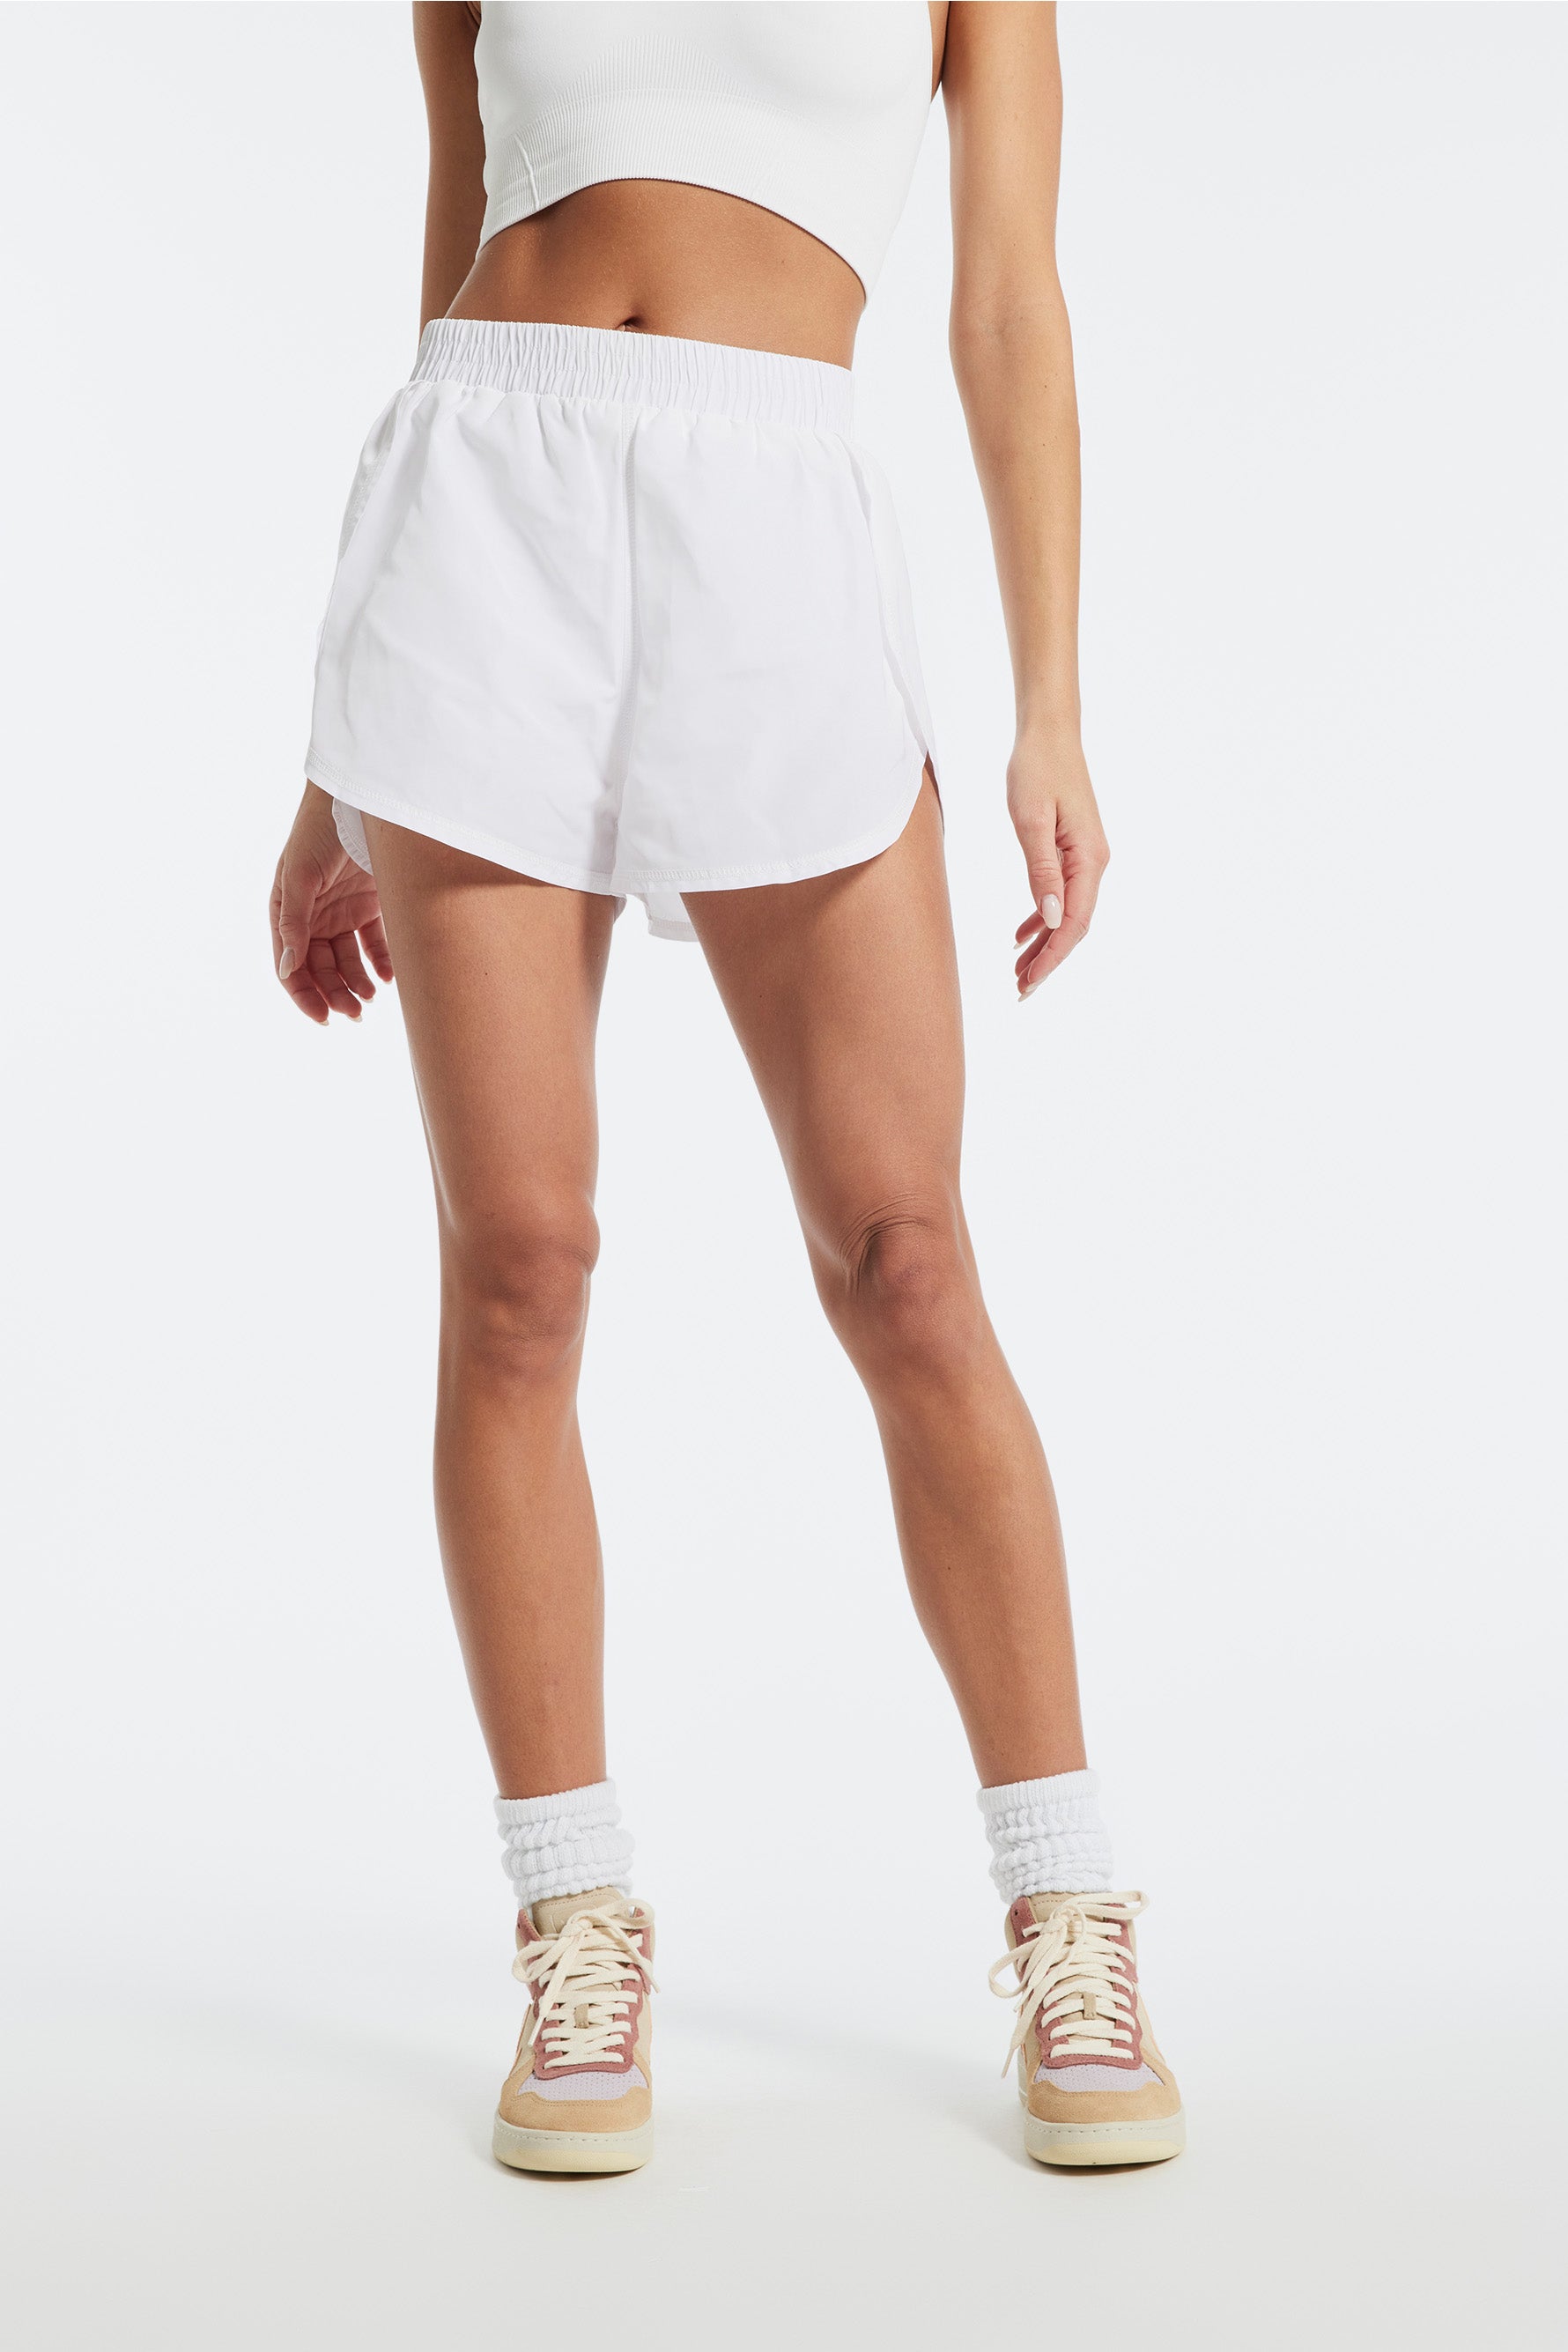 Years of Ours Terrain 2.0 Short in White | BANDIER - BANDIER